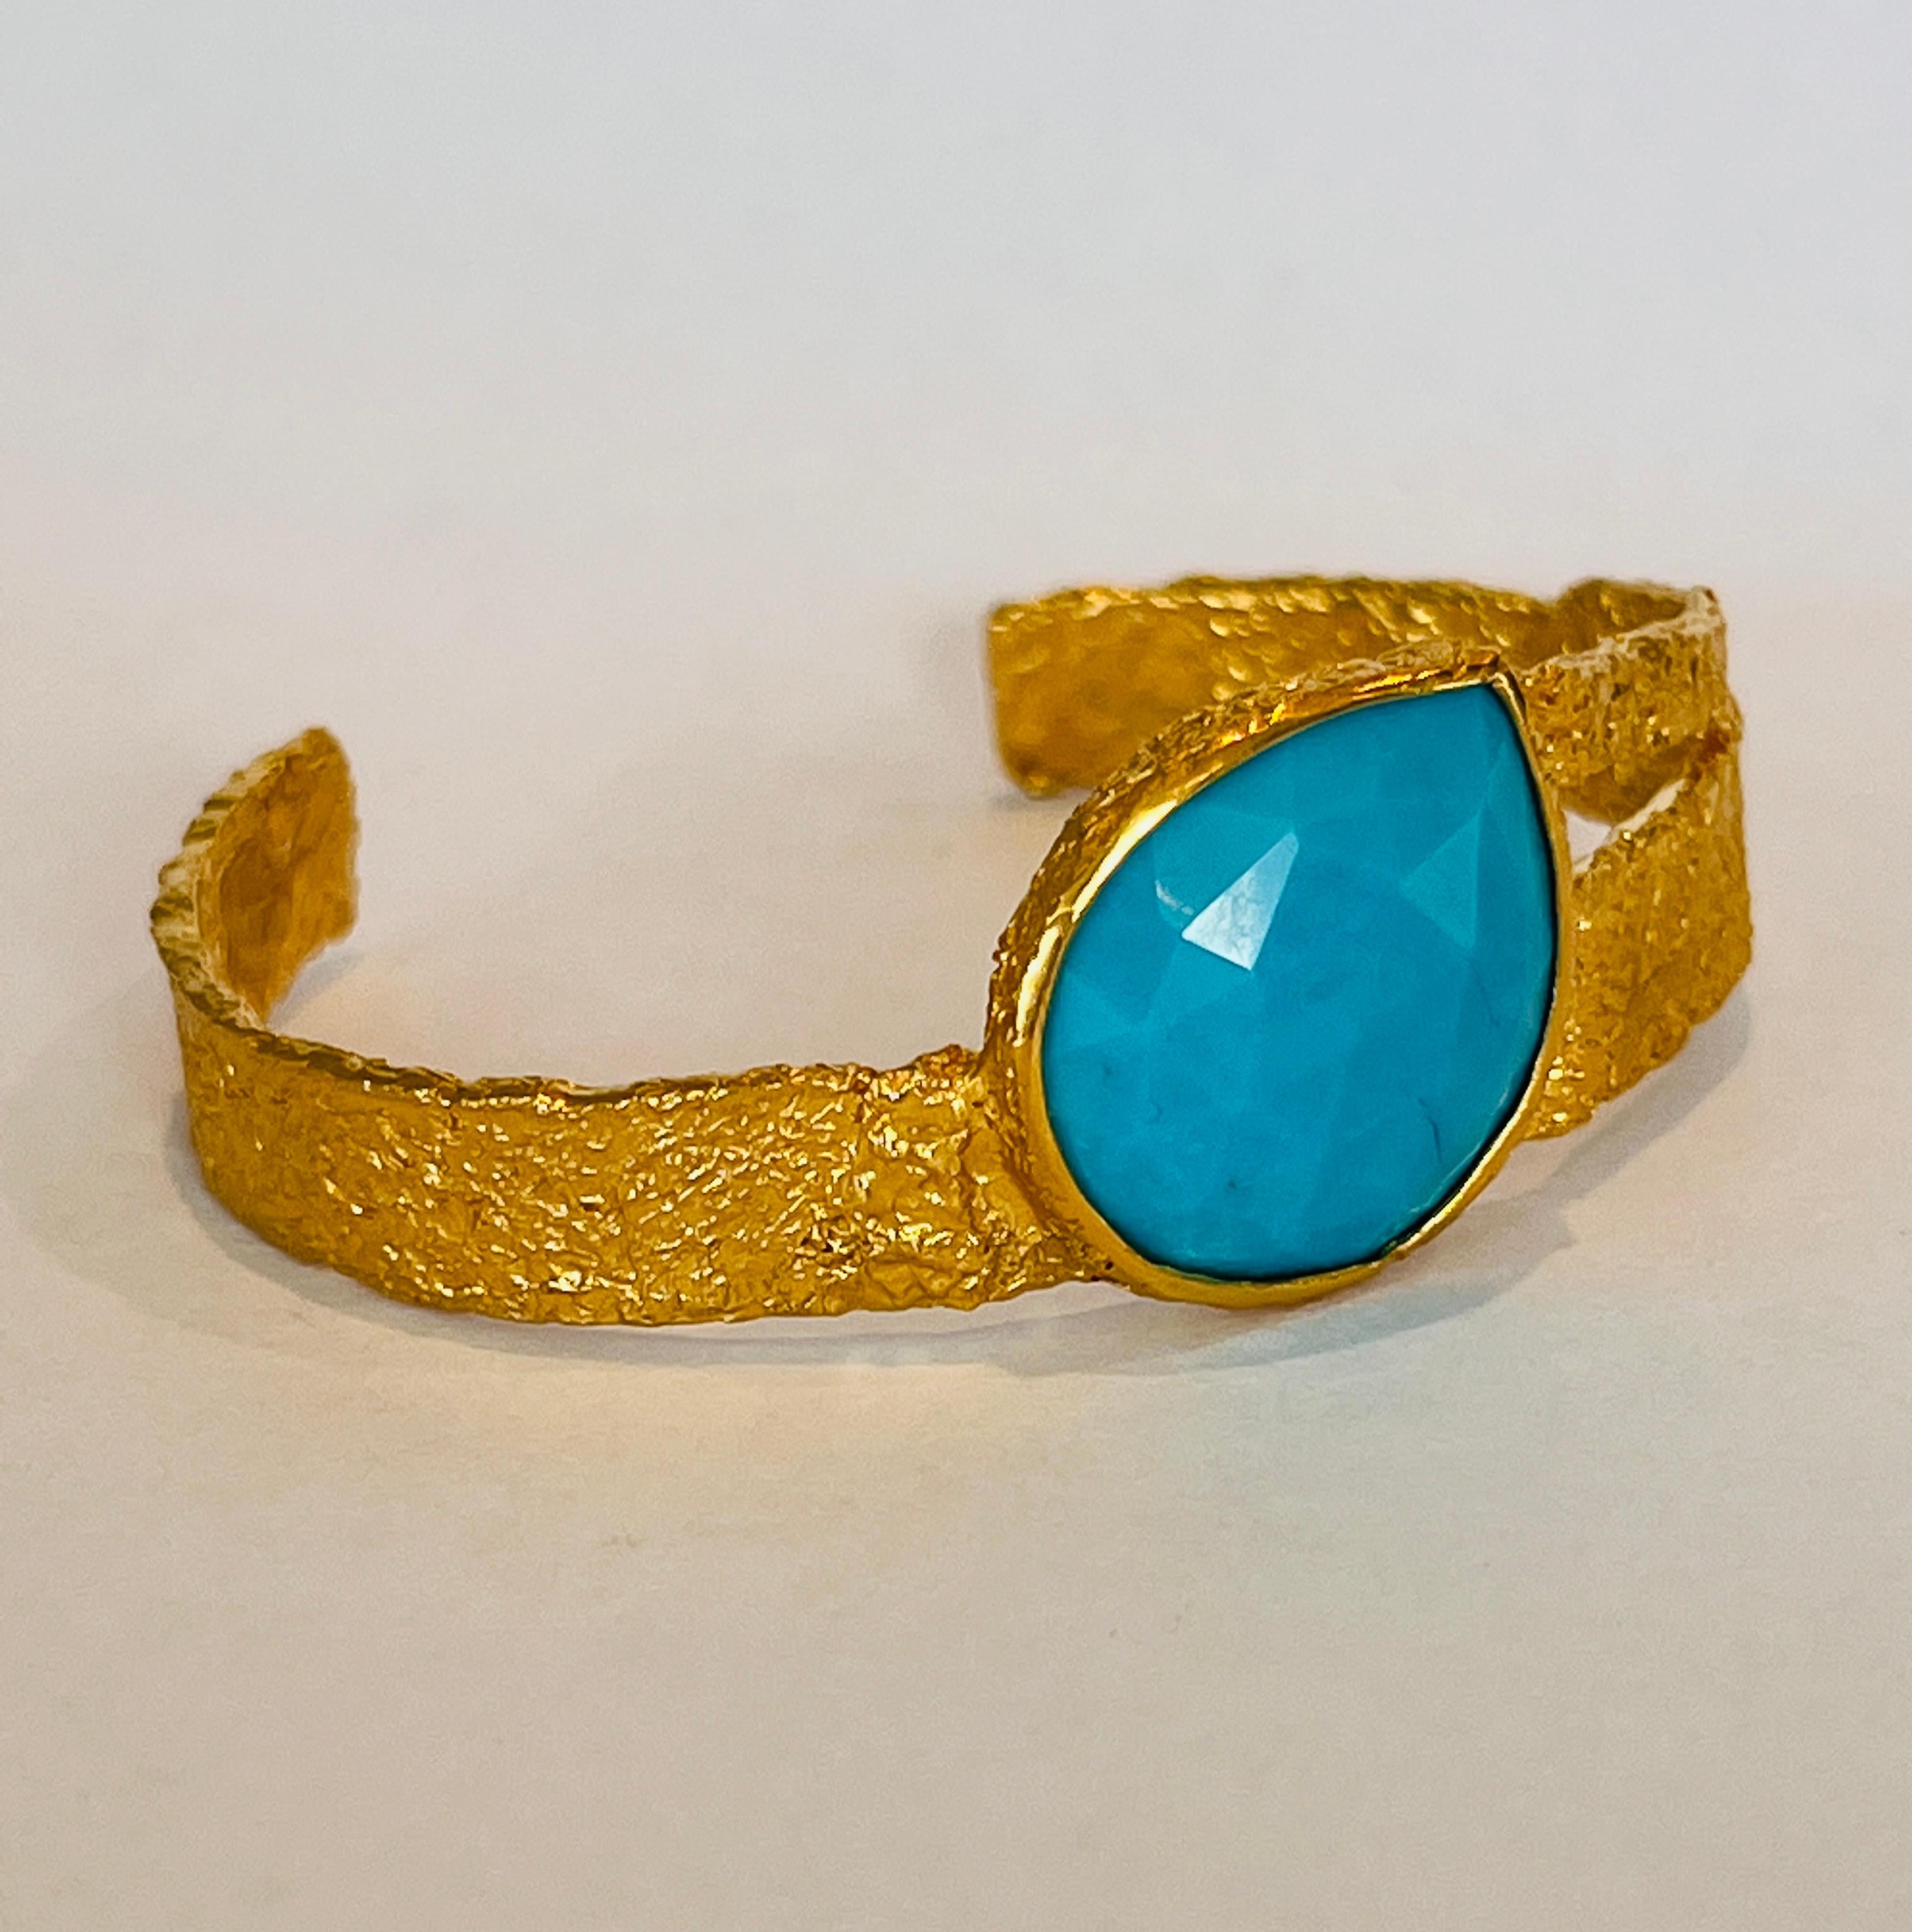 22k gold cuff is a one of a kind stunner that is carefully handmade and features a beautifully set pear shaped turquoise stone. Significant attention to detail is made with the combination of Tagili’s signature finish and the vibrant color of